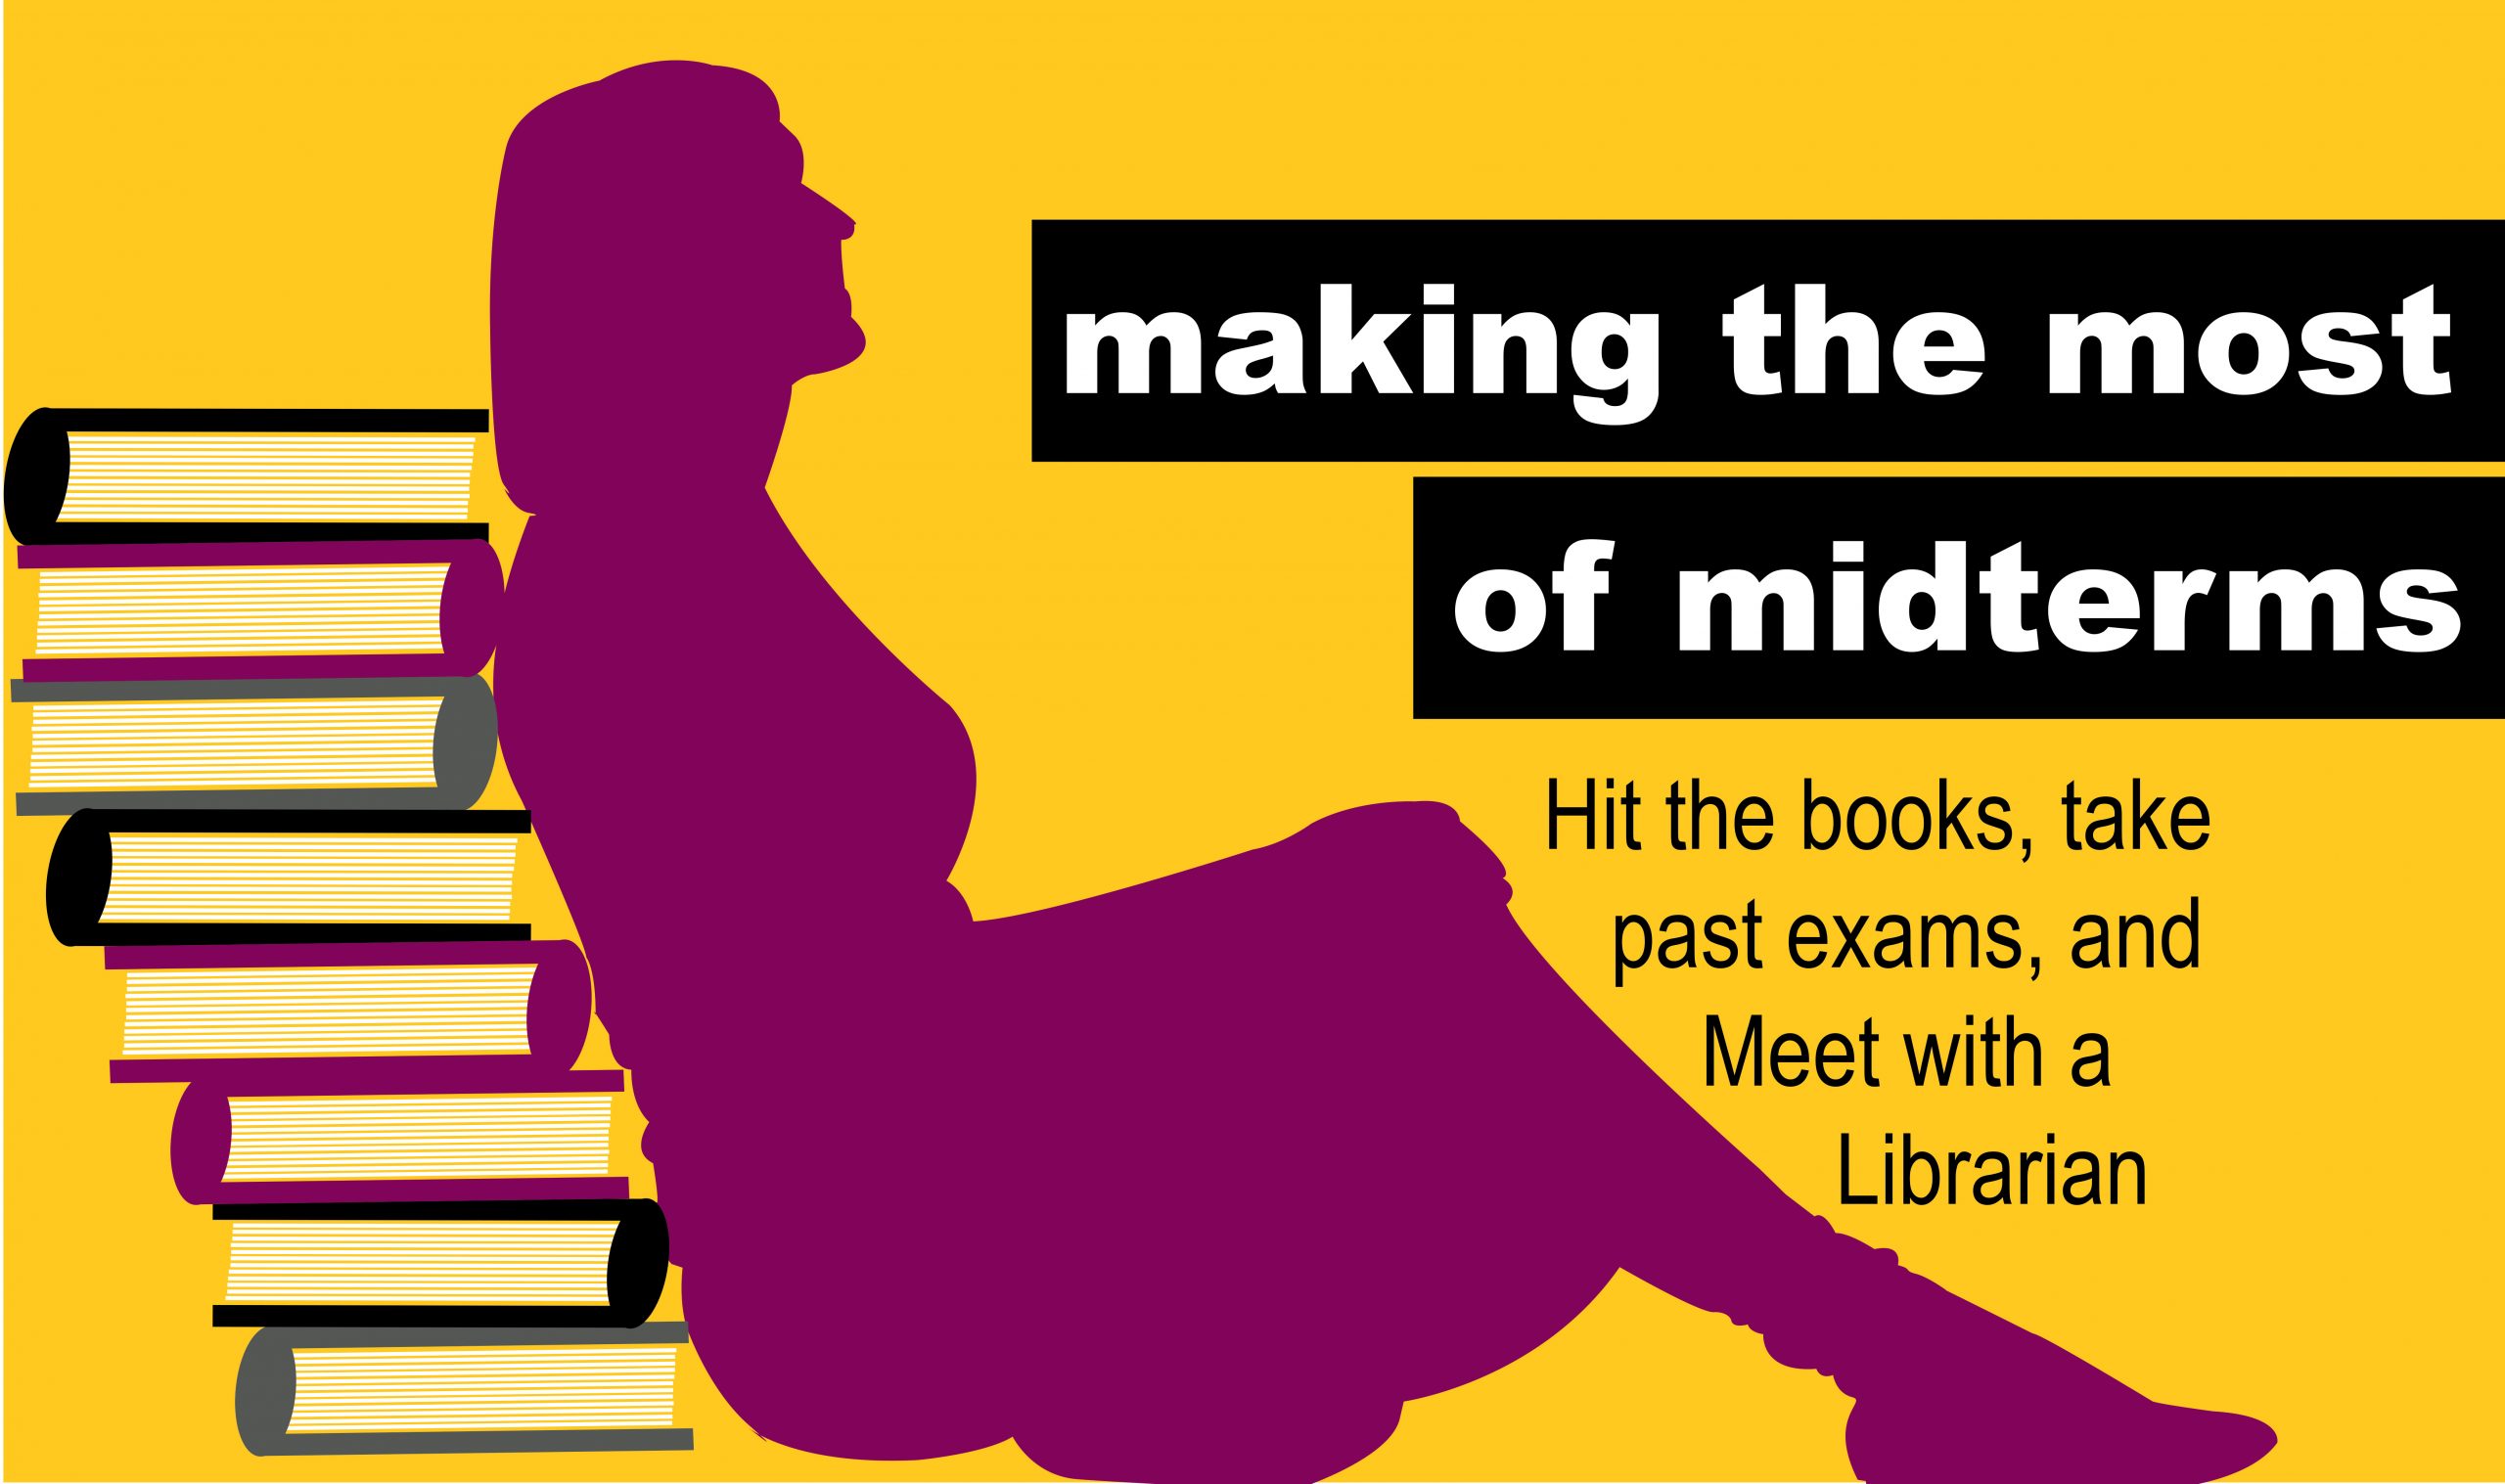 Midterms banner - "hit the books with past exams"